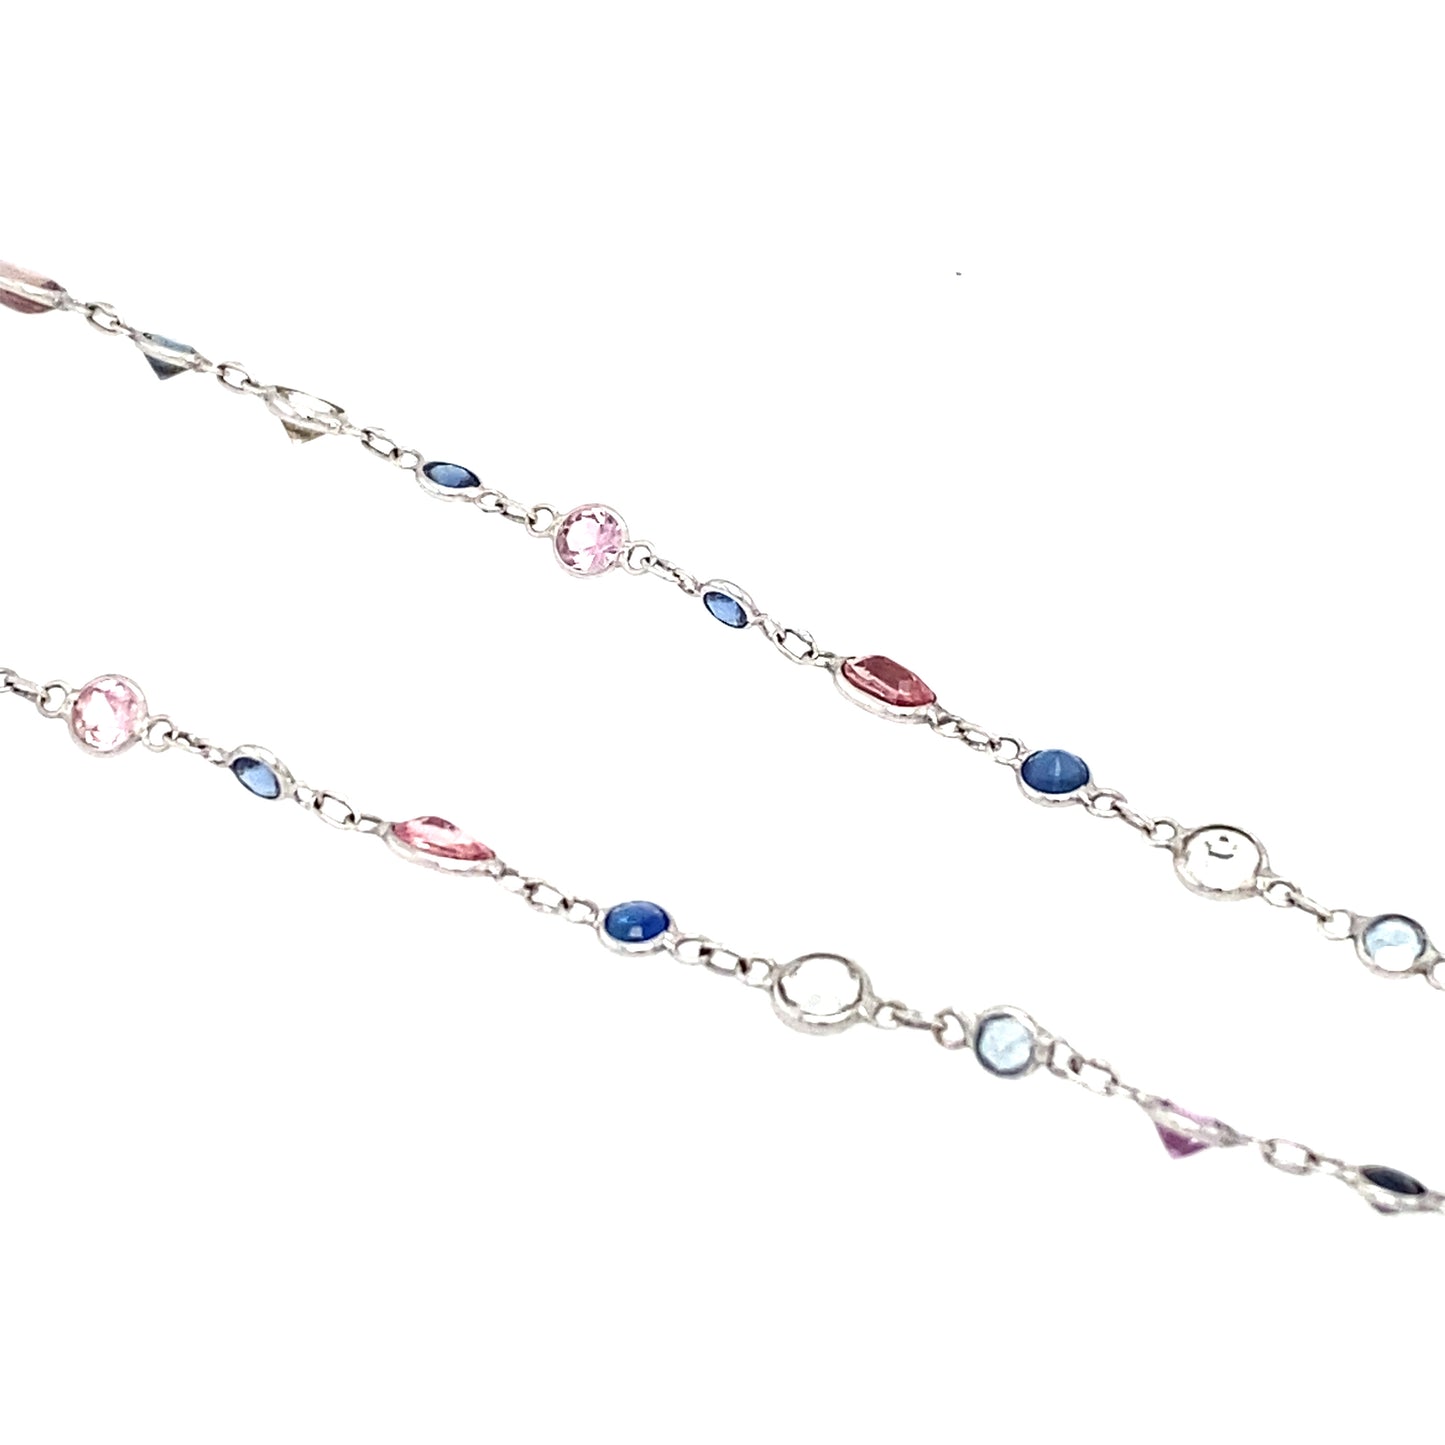 Circa 2000s Blue, White and Pink Sapphire Station Chain in 18K White Gold